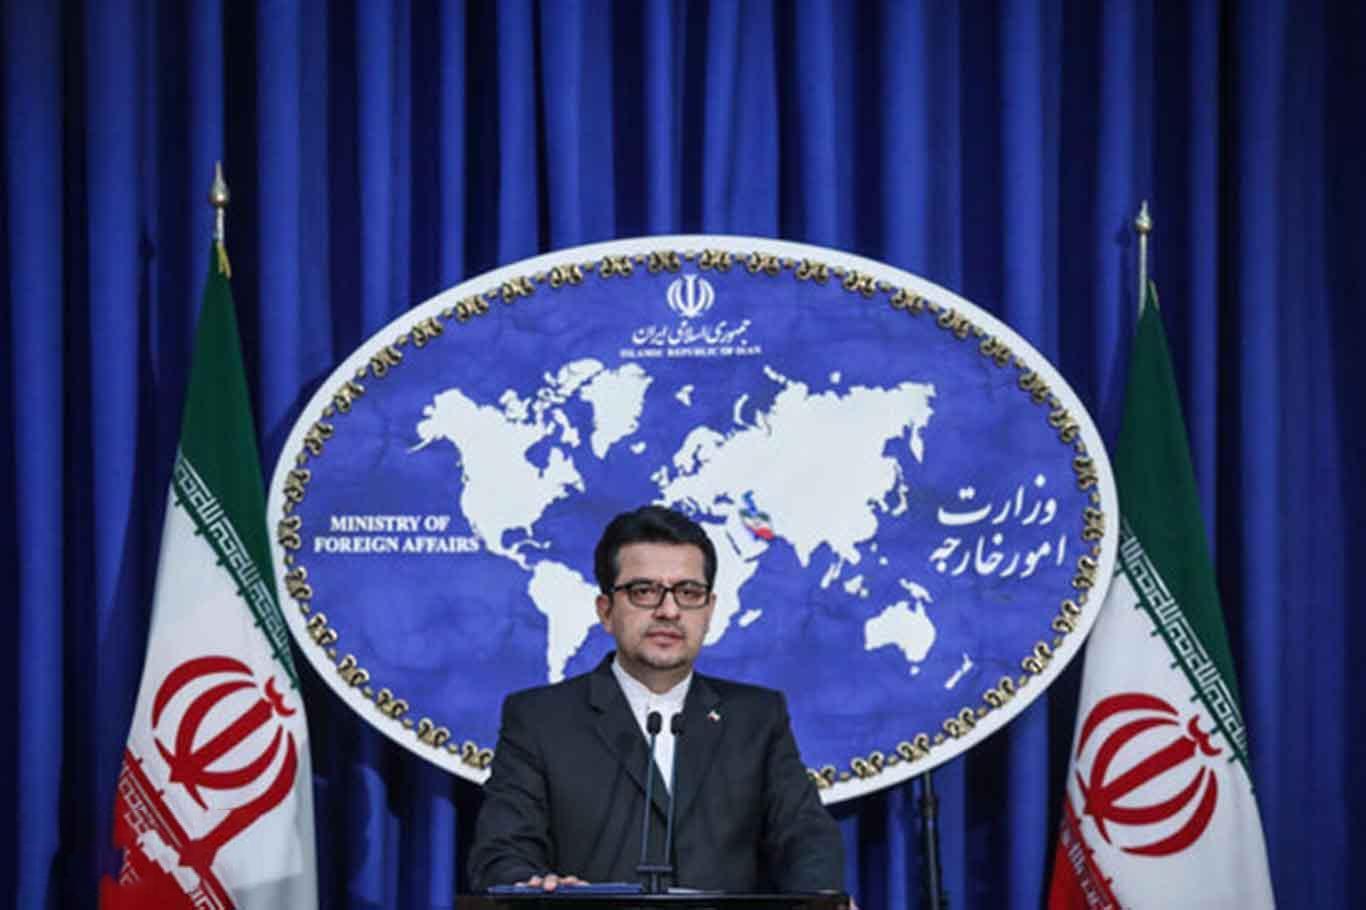 Iran: Regional security cannot be ensured with obedience to the United States